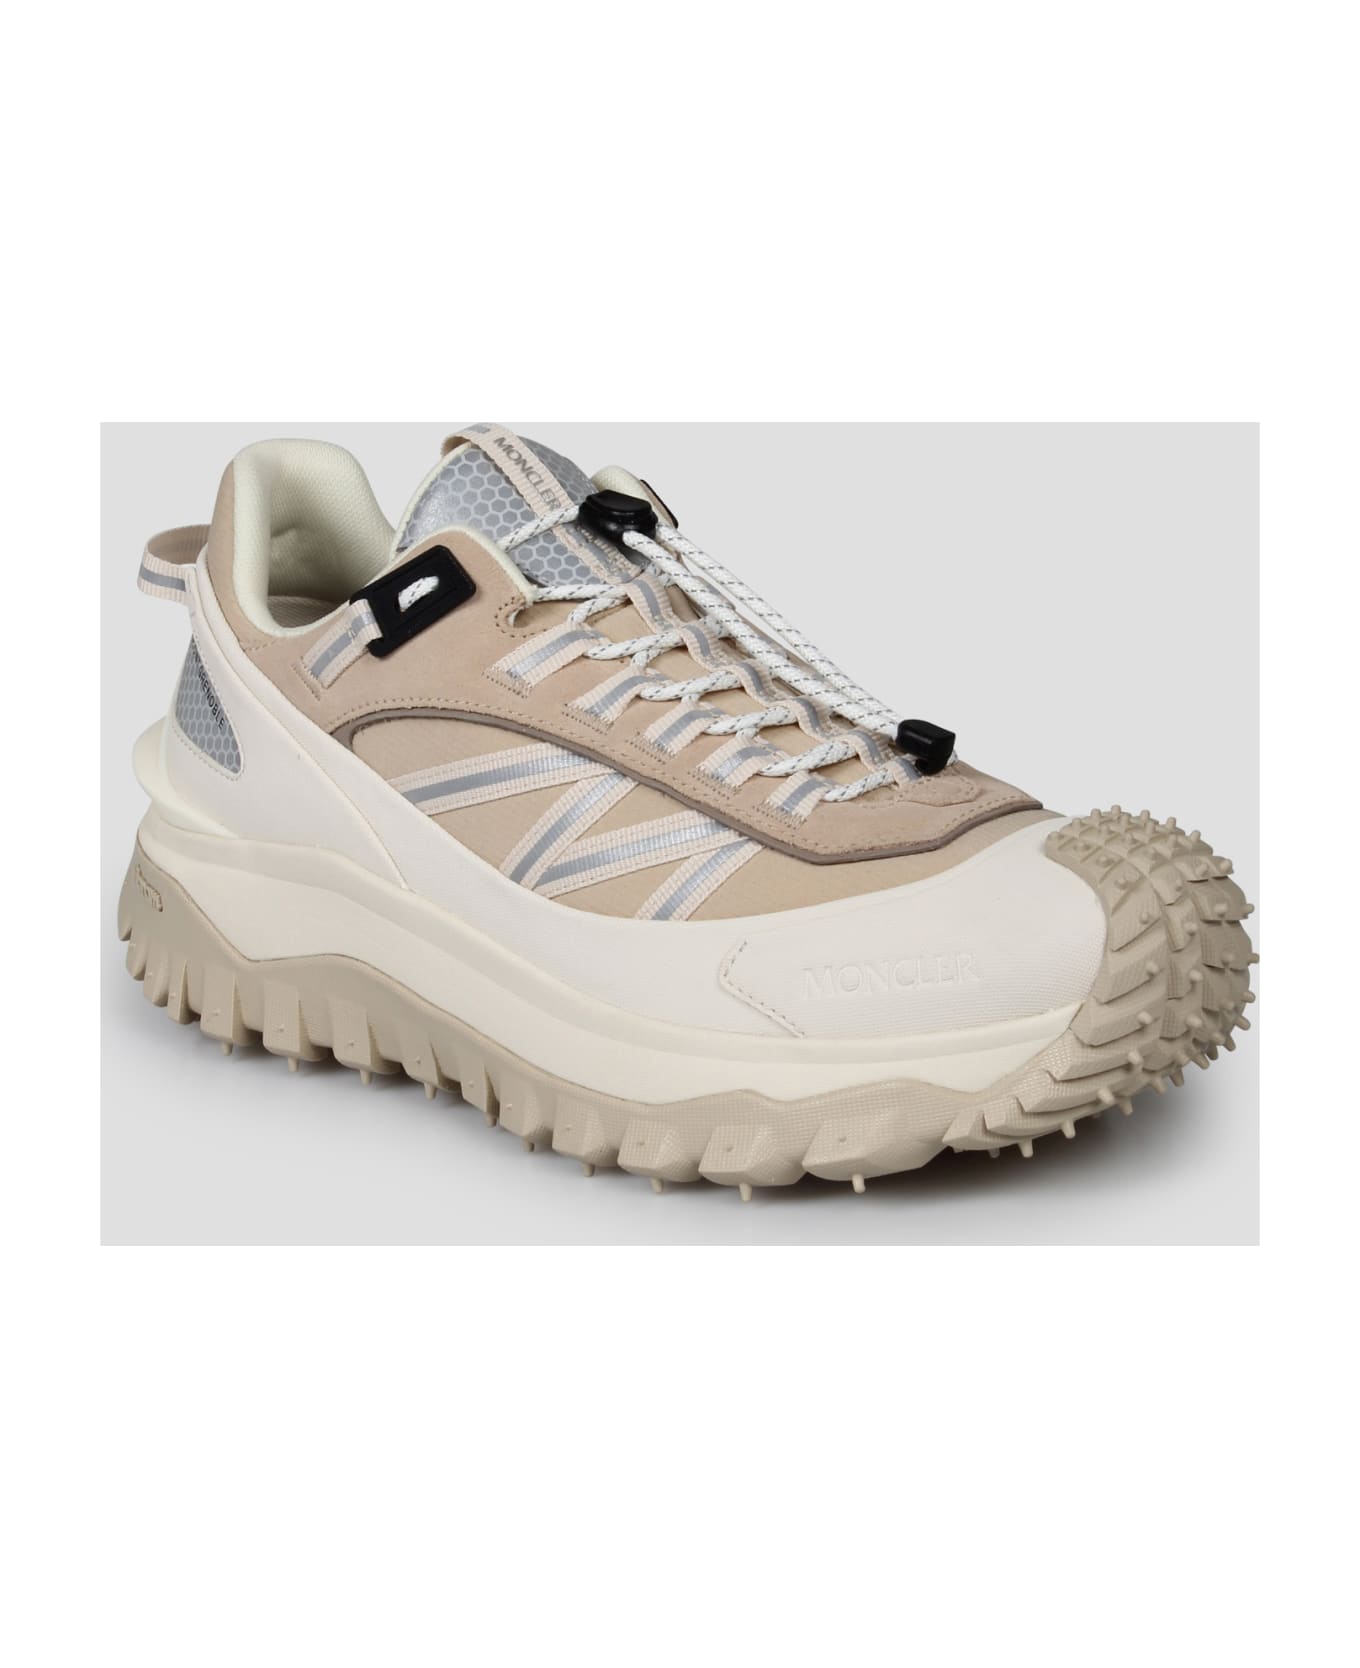 Moncler 'trailgrip' Sneakers - Nude & Neutrals